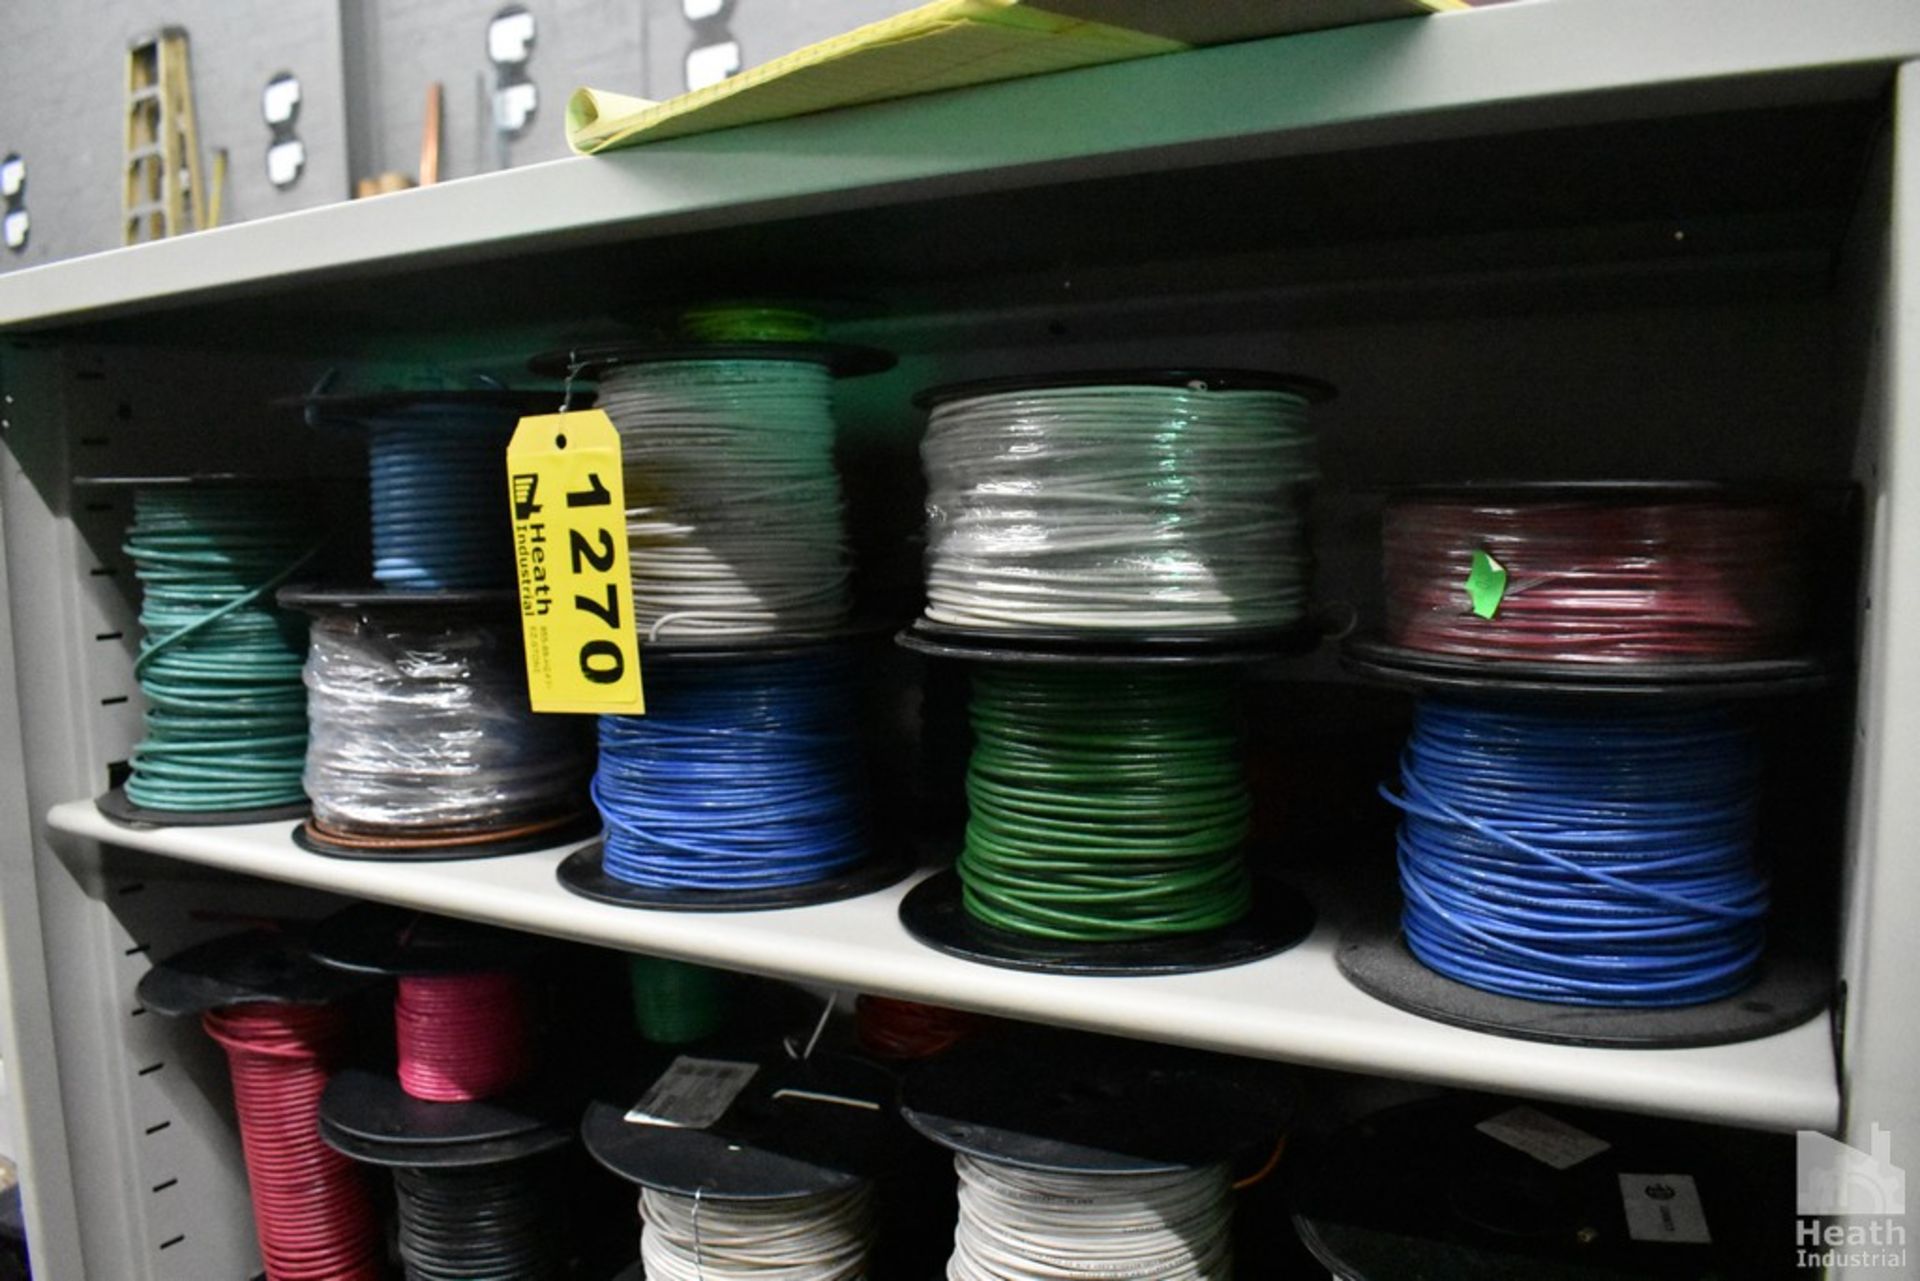 (16) ASSORTED SPOOLS OF WIRE ON SHELF